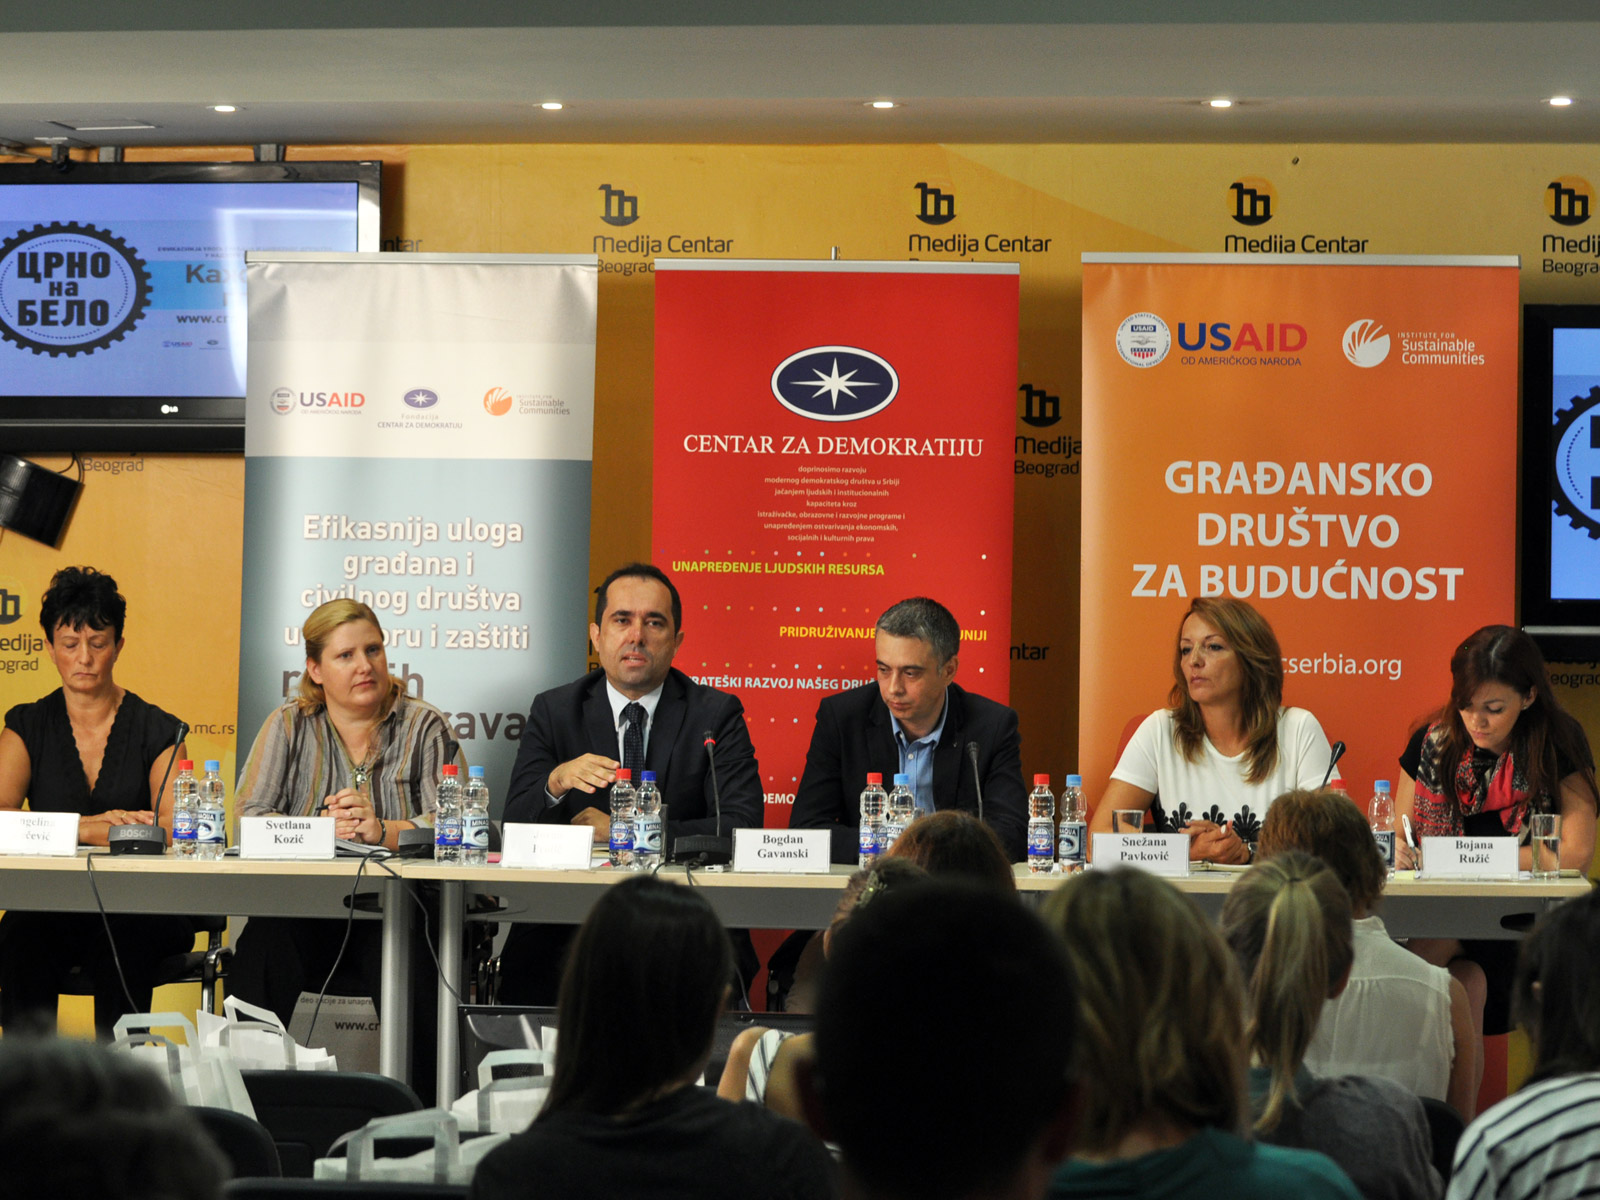 Results of the Cooperation between Citizens and Civil Society in Monitoring and Protection of Labor Rights